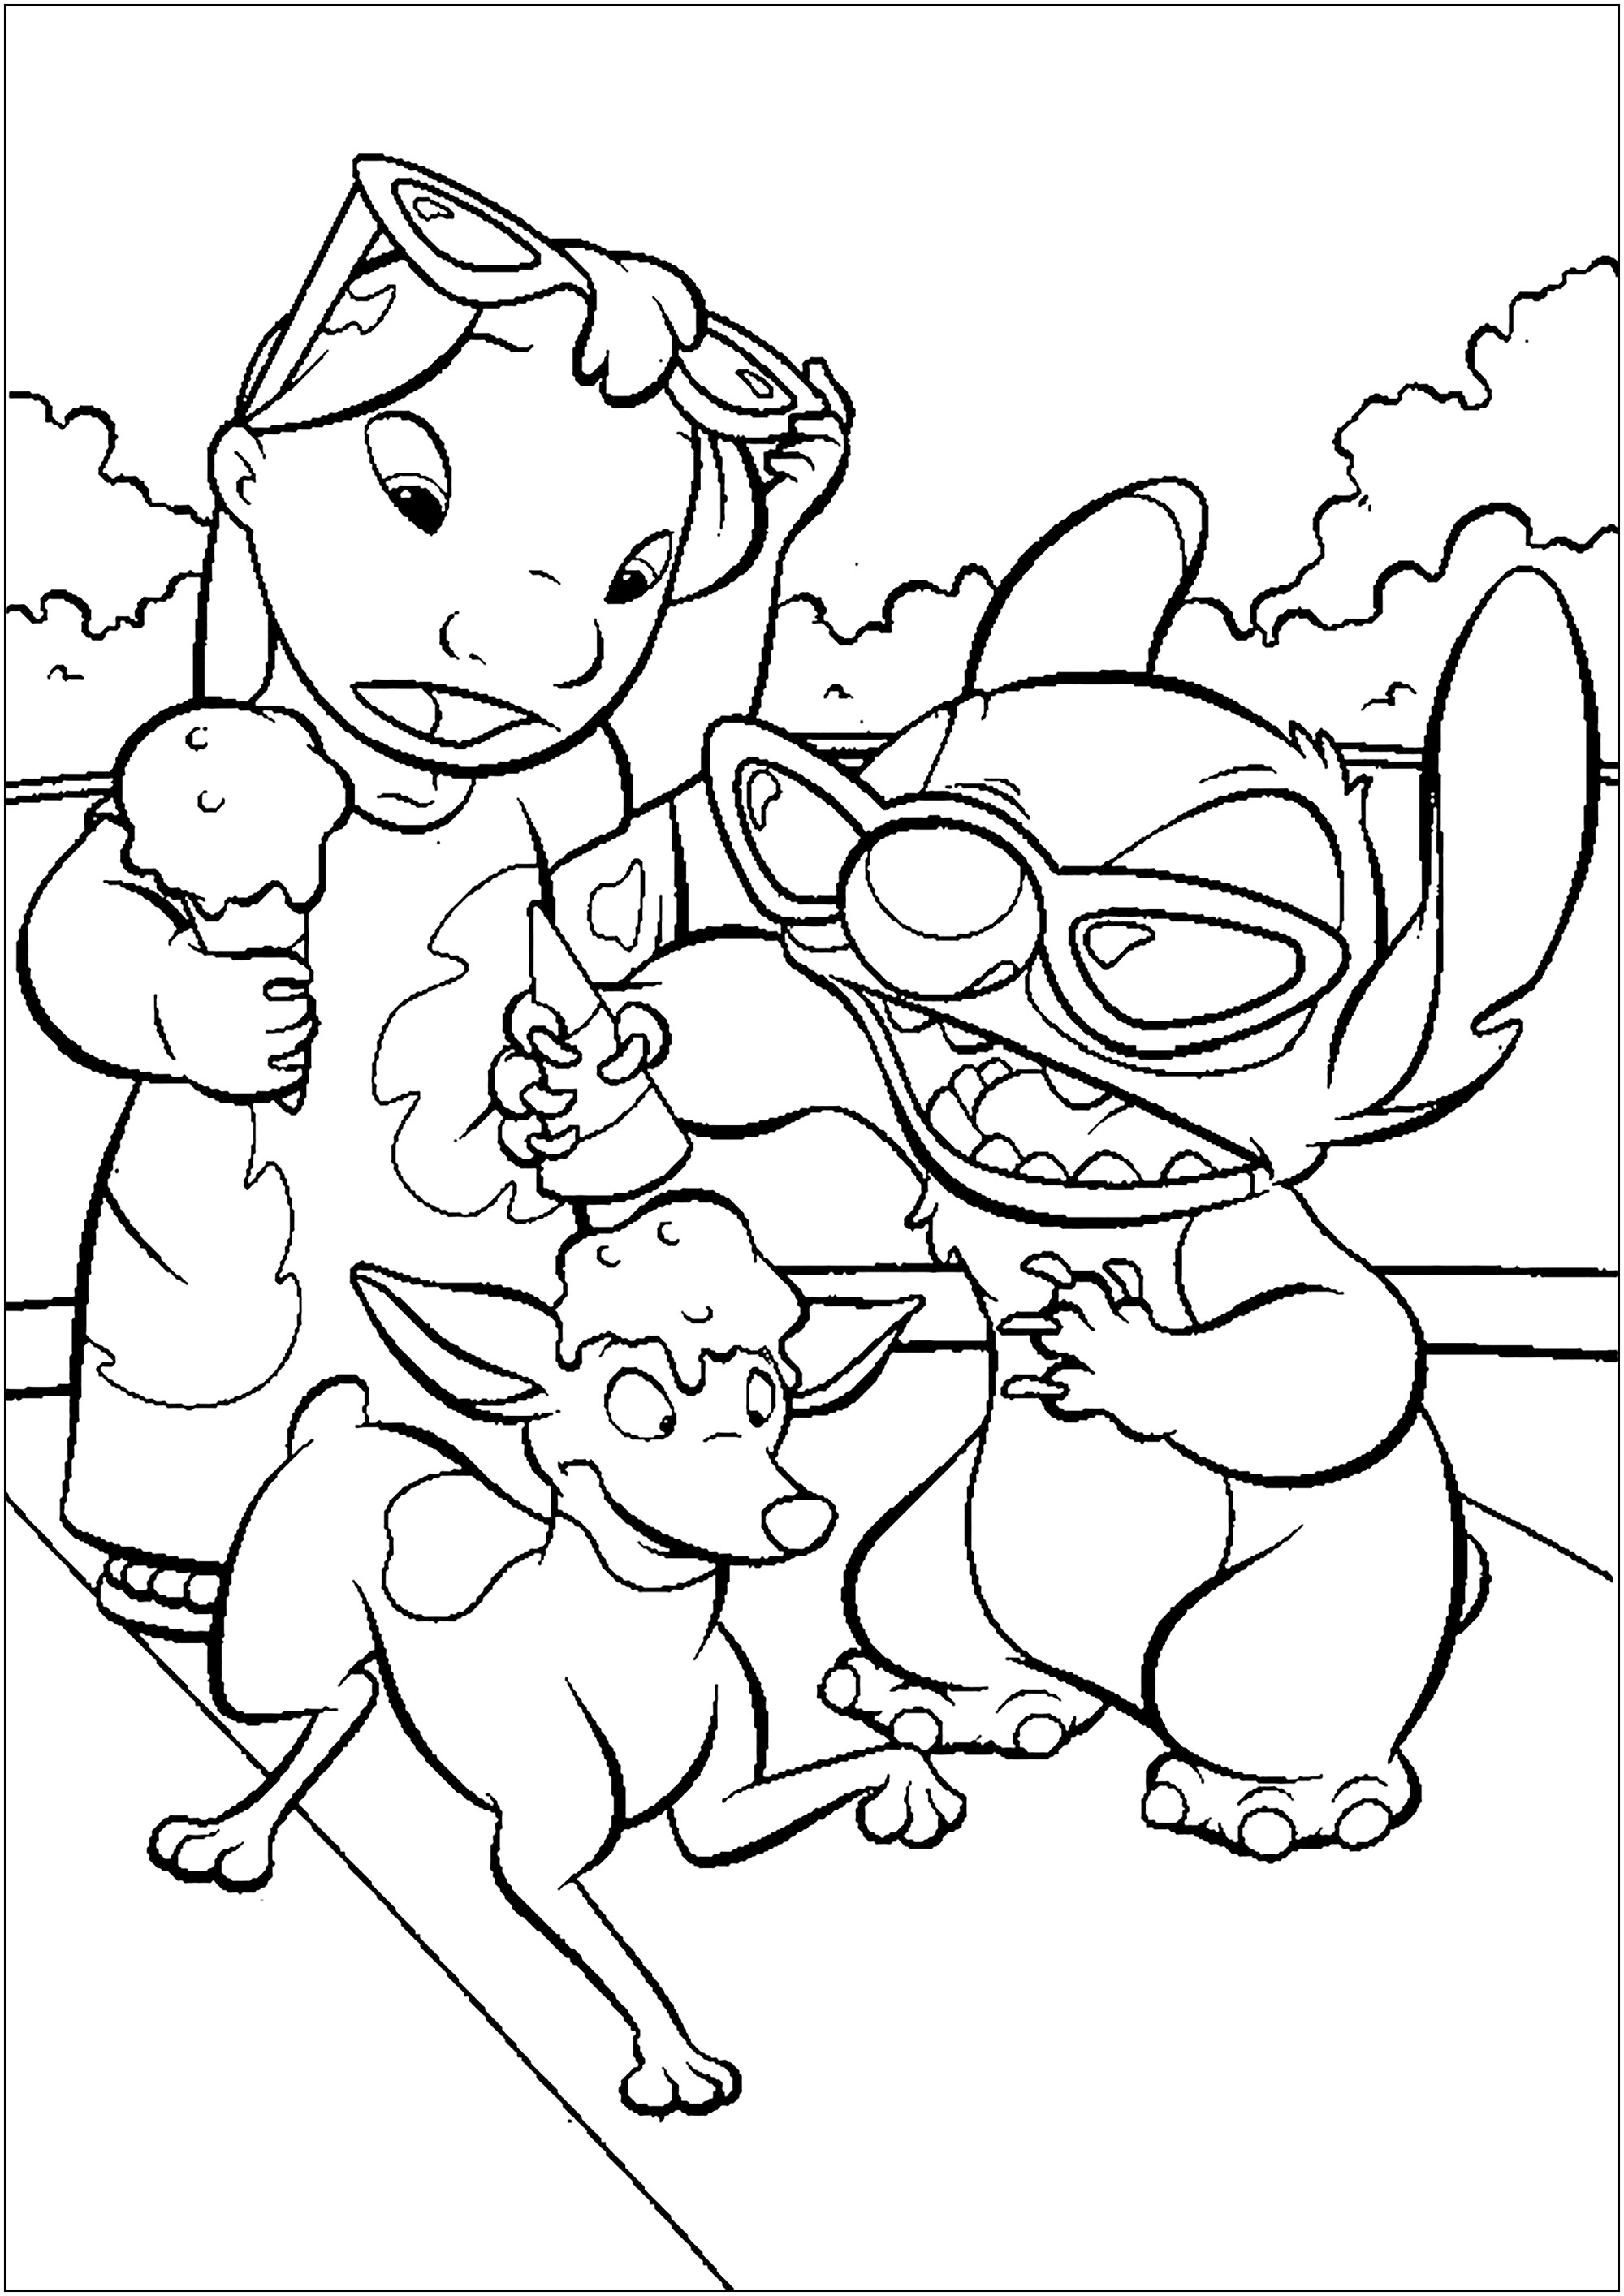 Lilo and Stitch coloring book: funny scene with a dog and ice cream ...